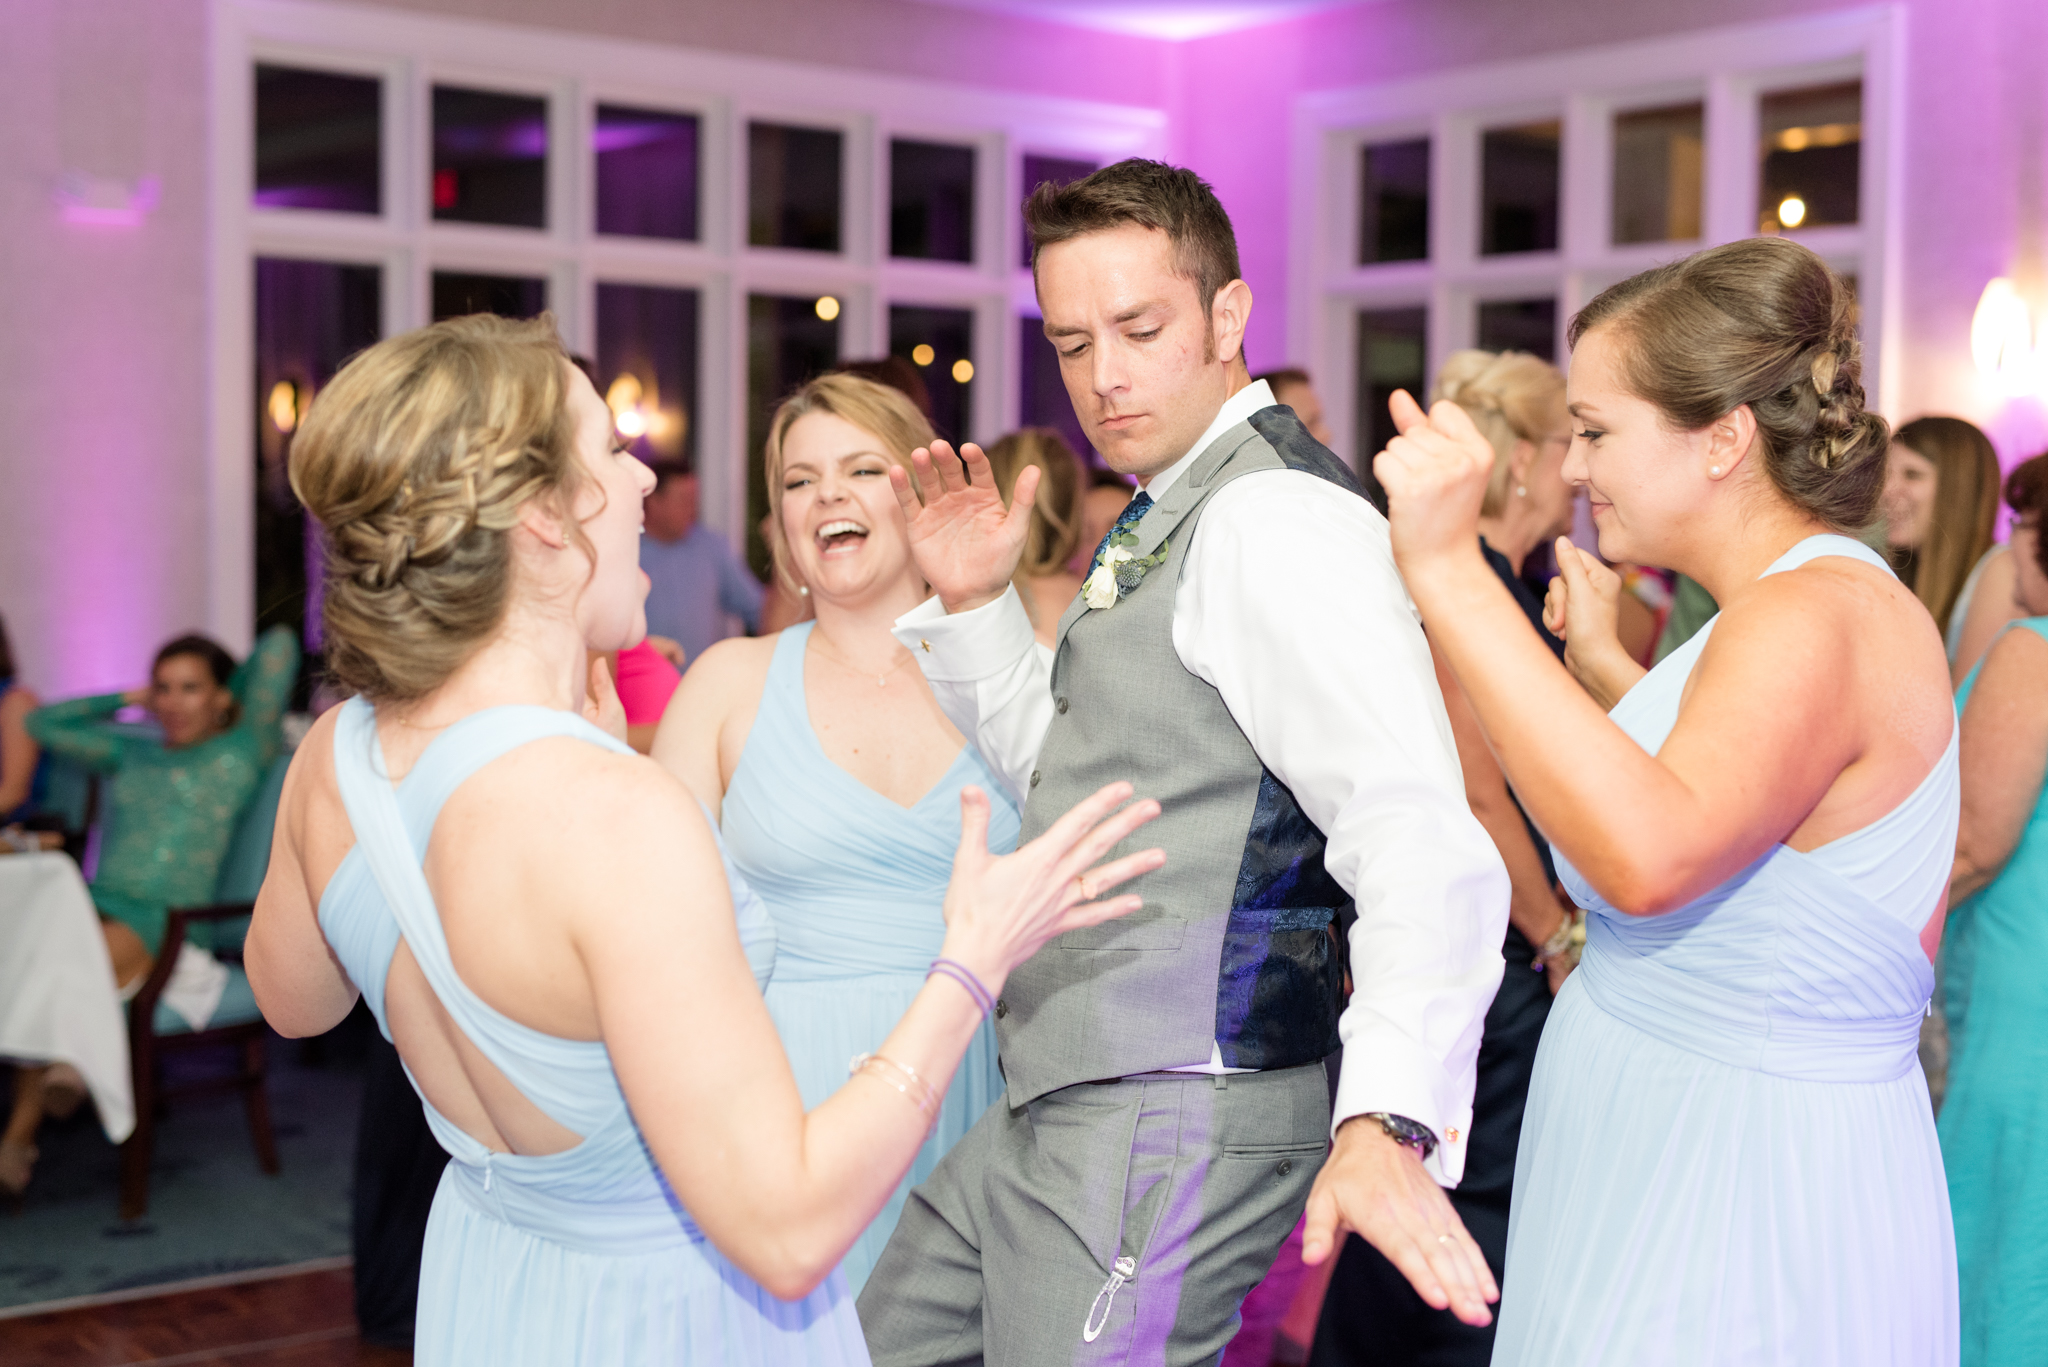 Groom and bridesmaids dance together.